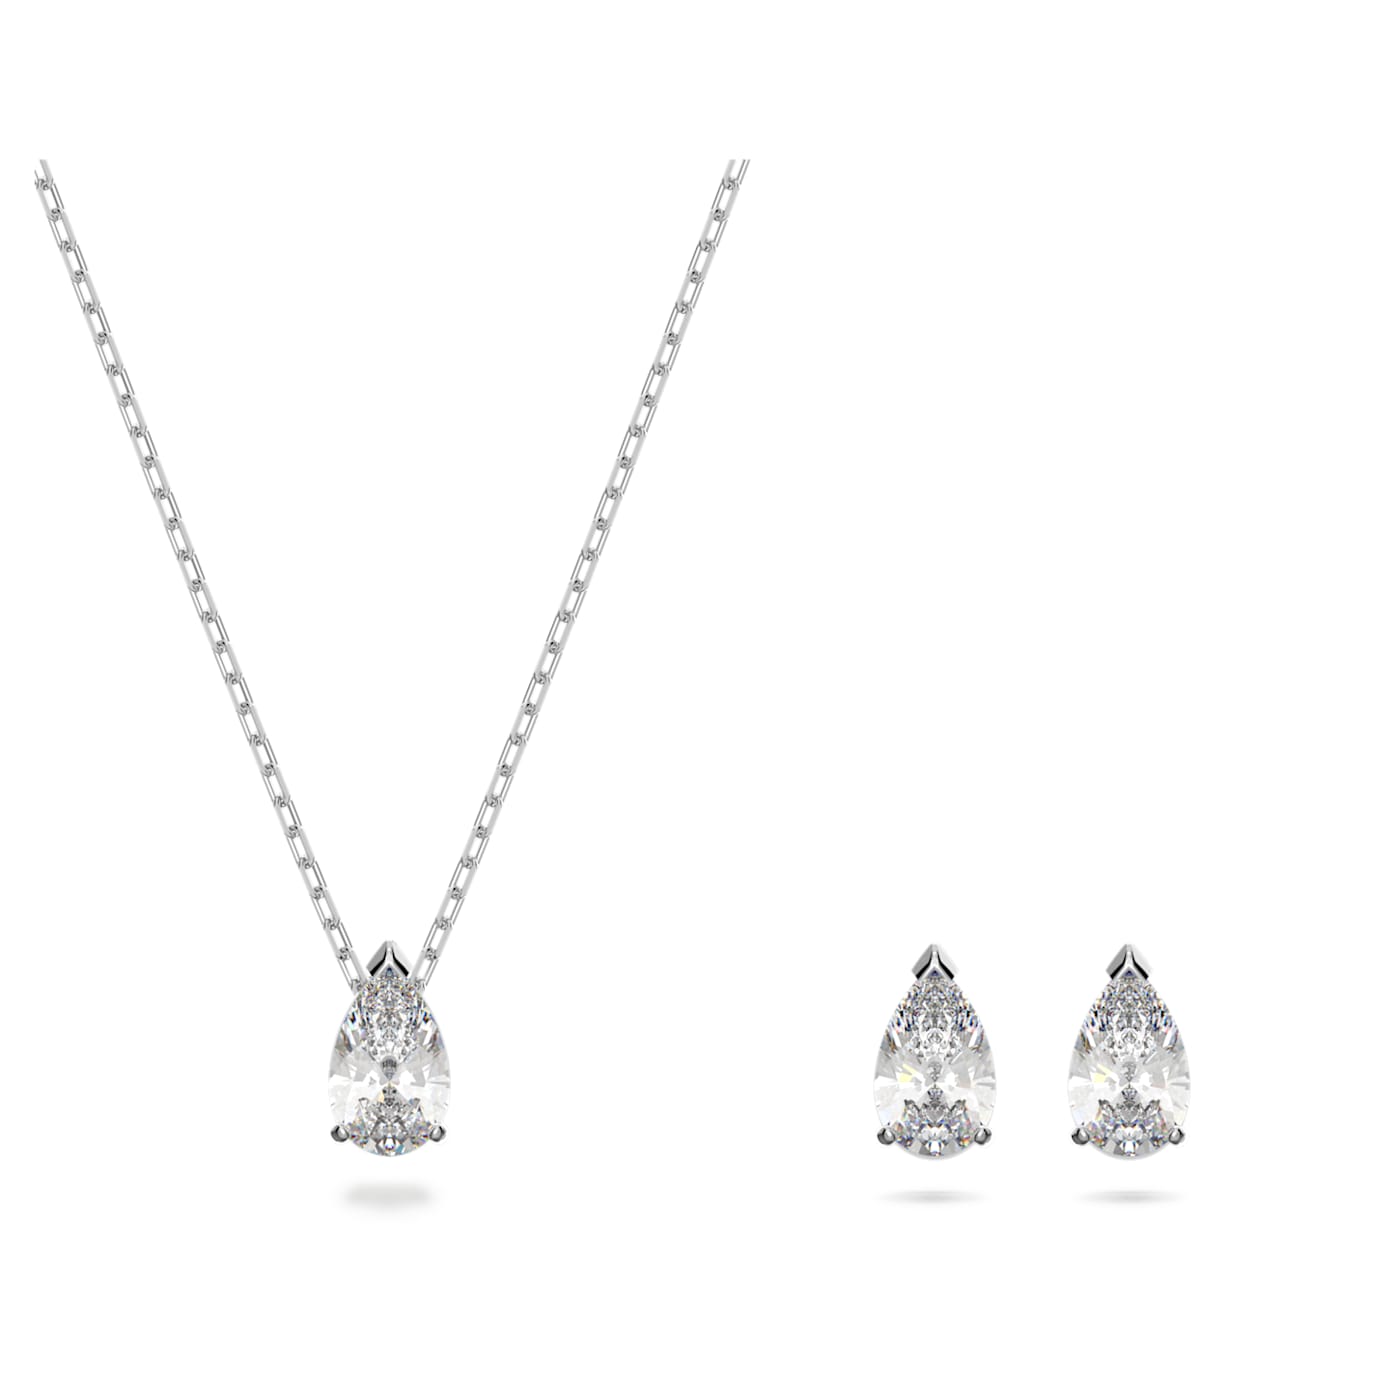 Swarovski Attract Pear Cut White Crystal Necklace And Earrings Set D